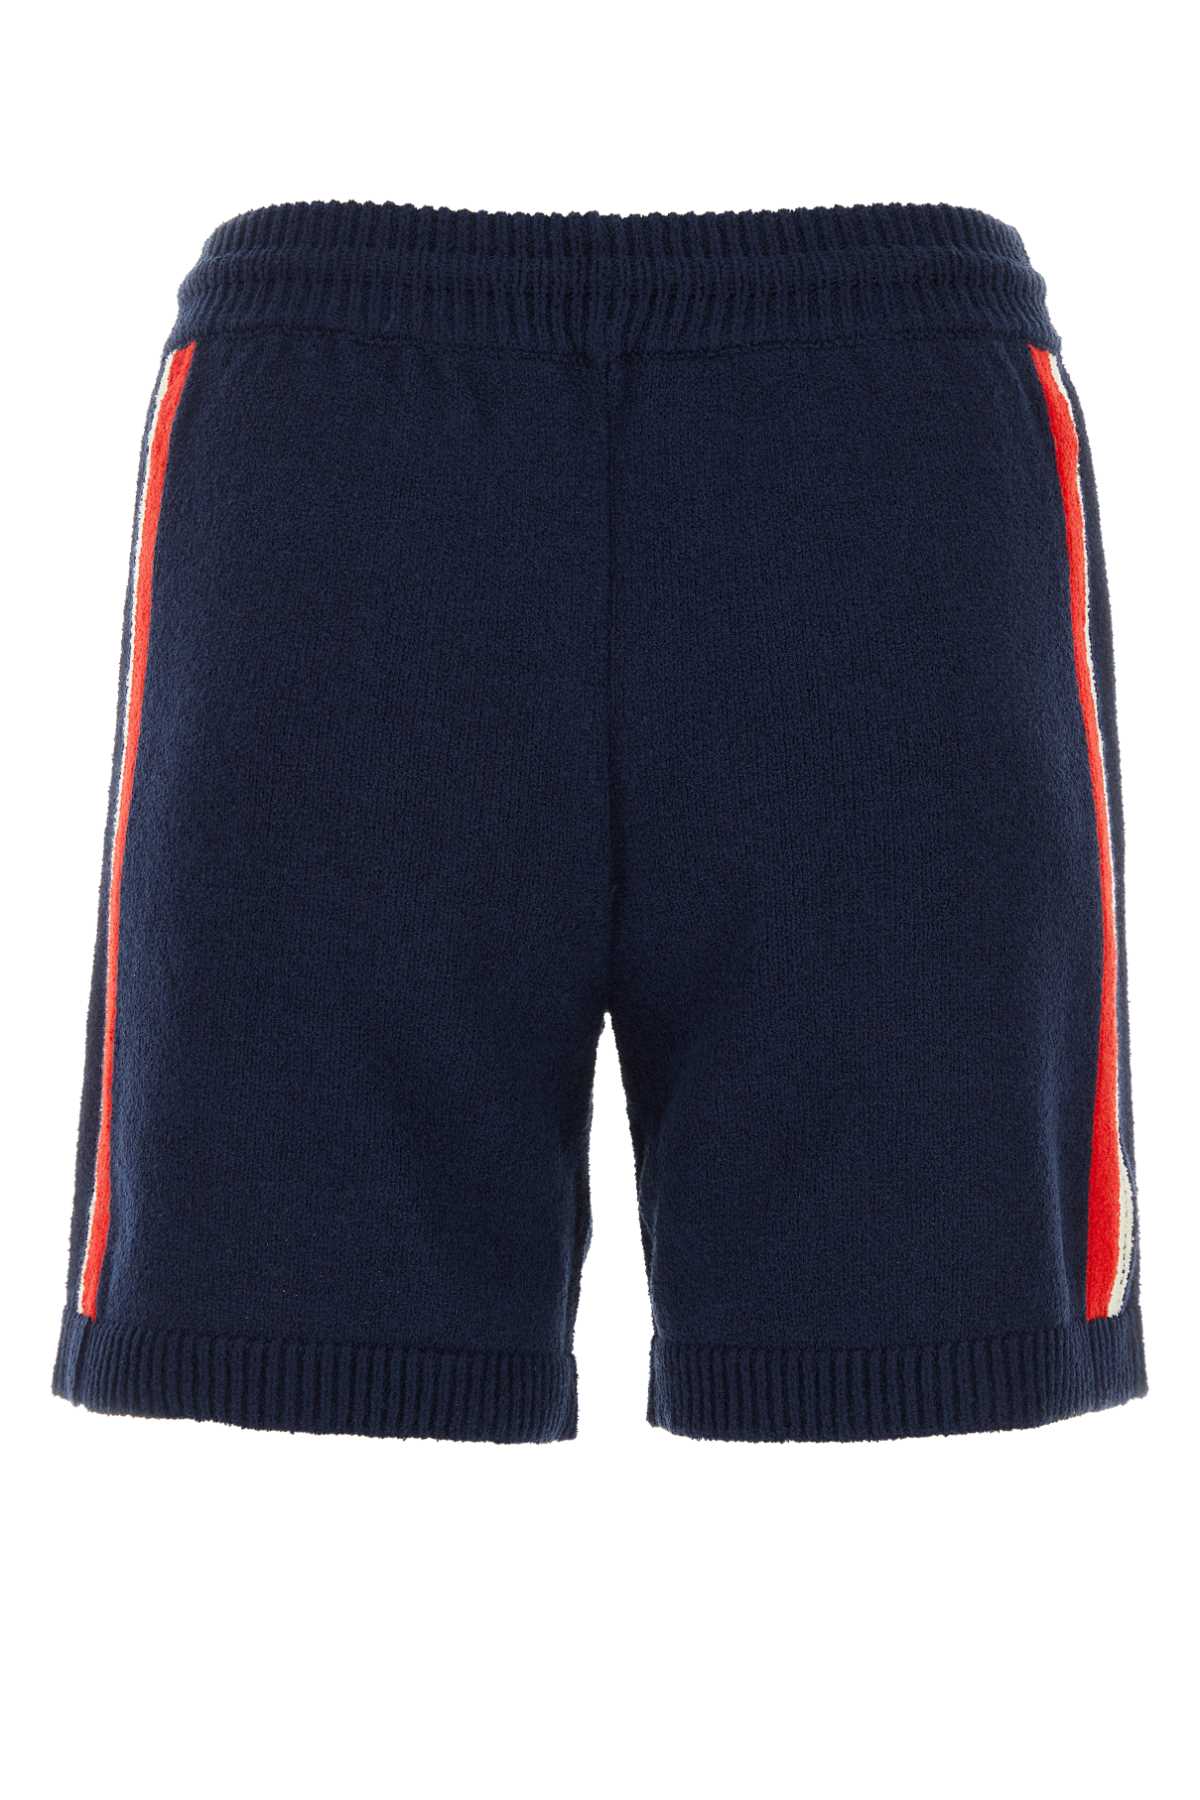 Gucci Multicolor Stretch Cotton Blend Shorts In Blueredivorymix